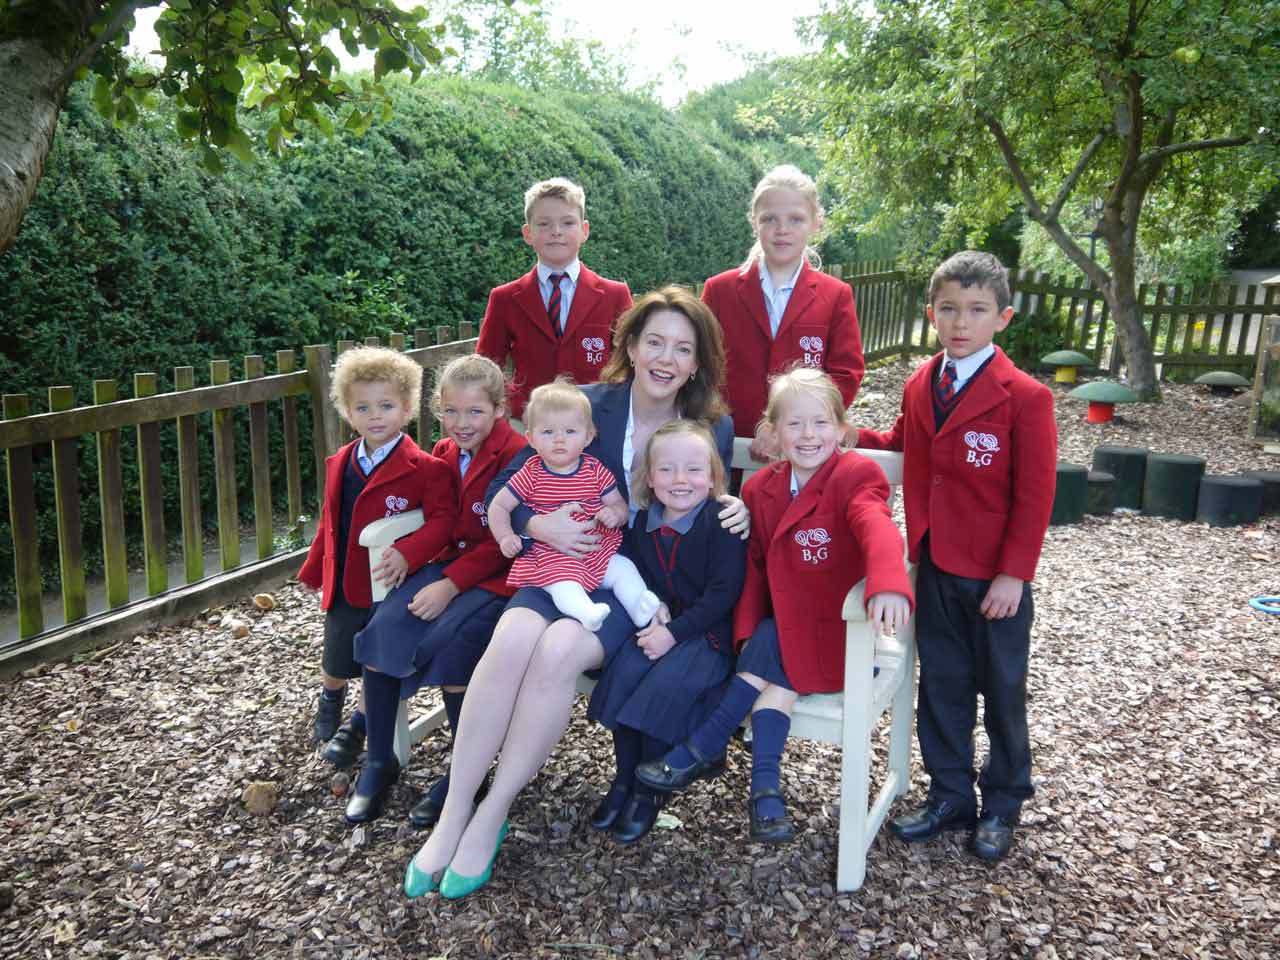 New Headmistress excited about the new term at Harrogate independent prep school Belmont Grosvenor